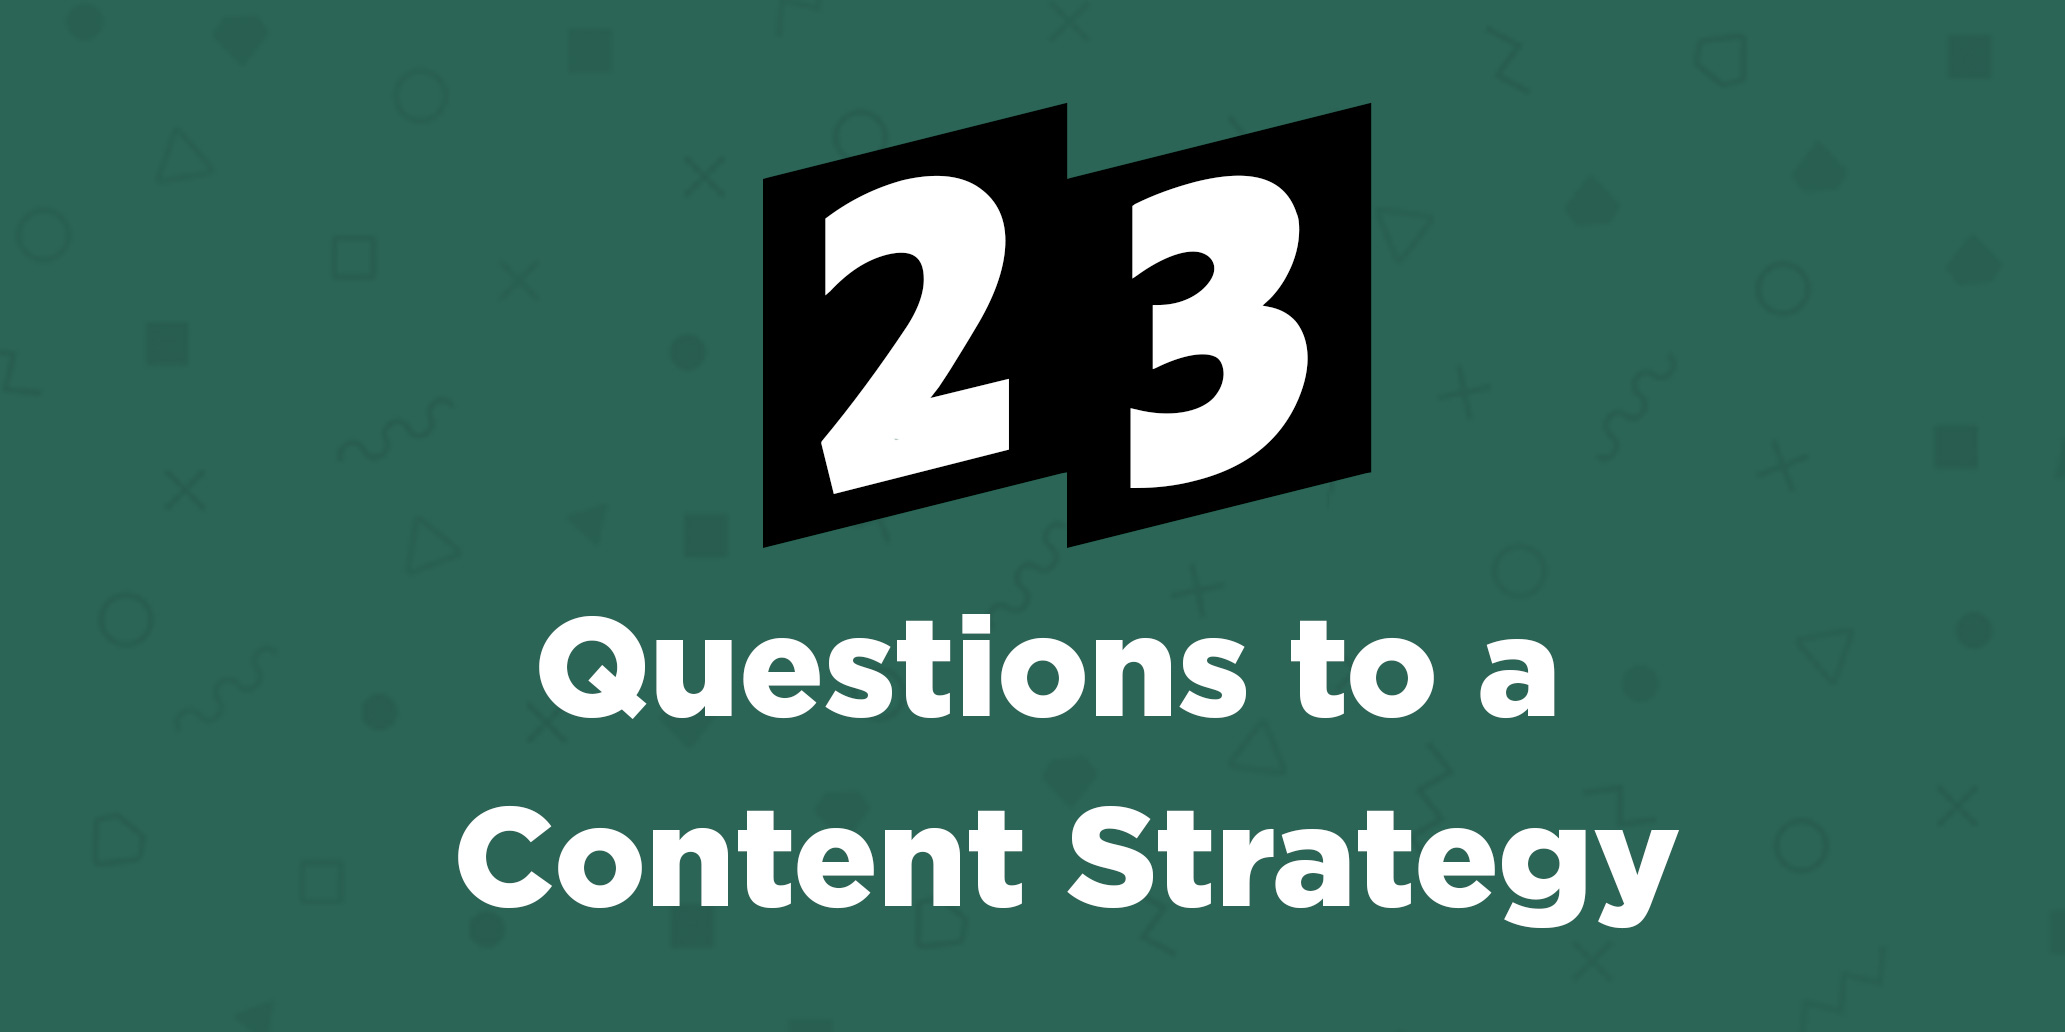 23 Questions to a Content Strategy